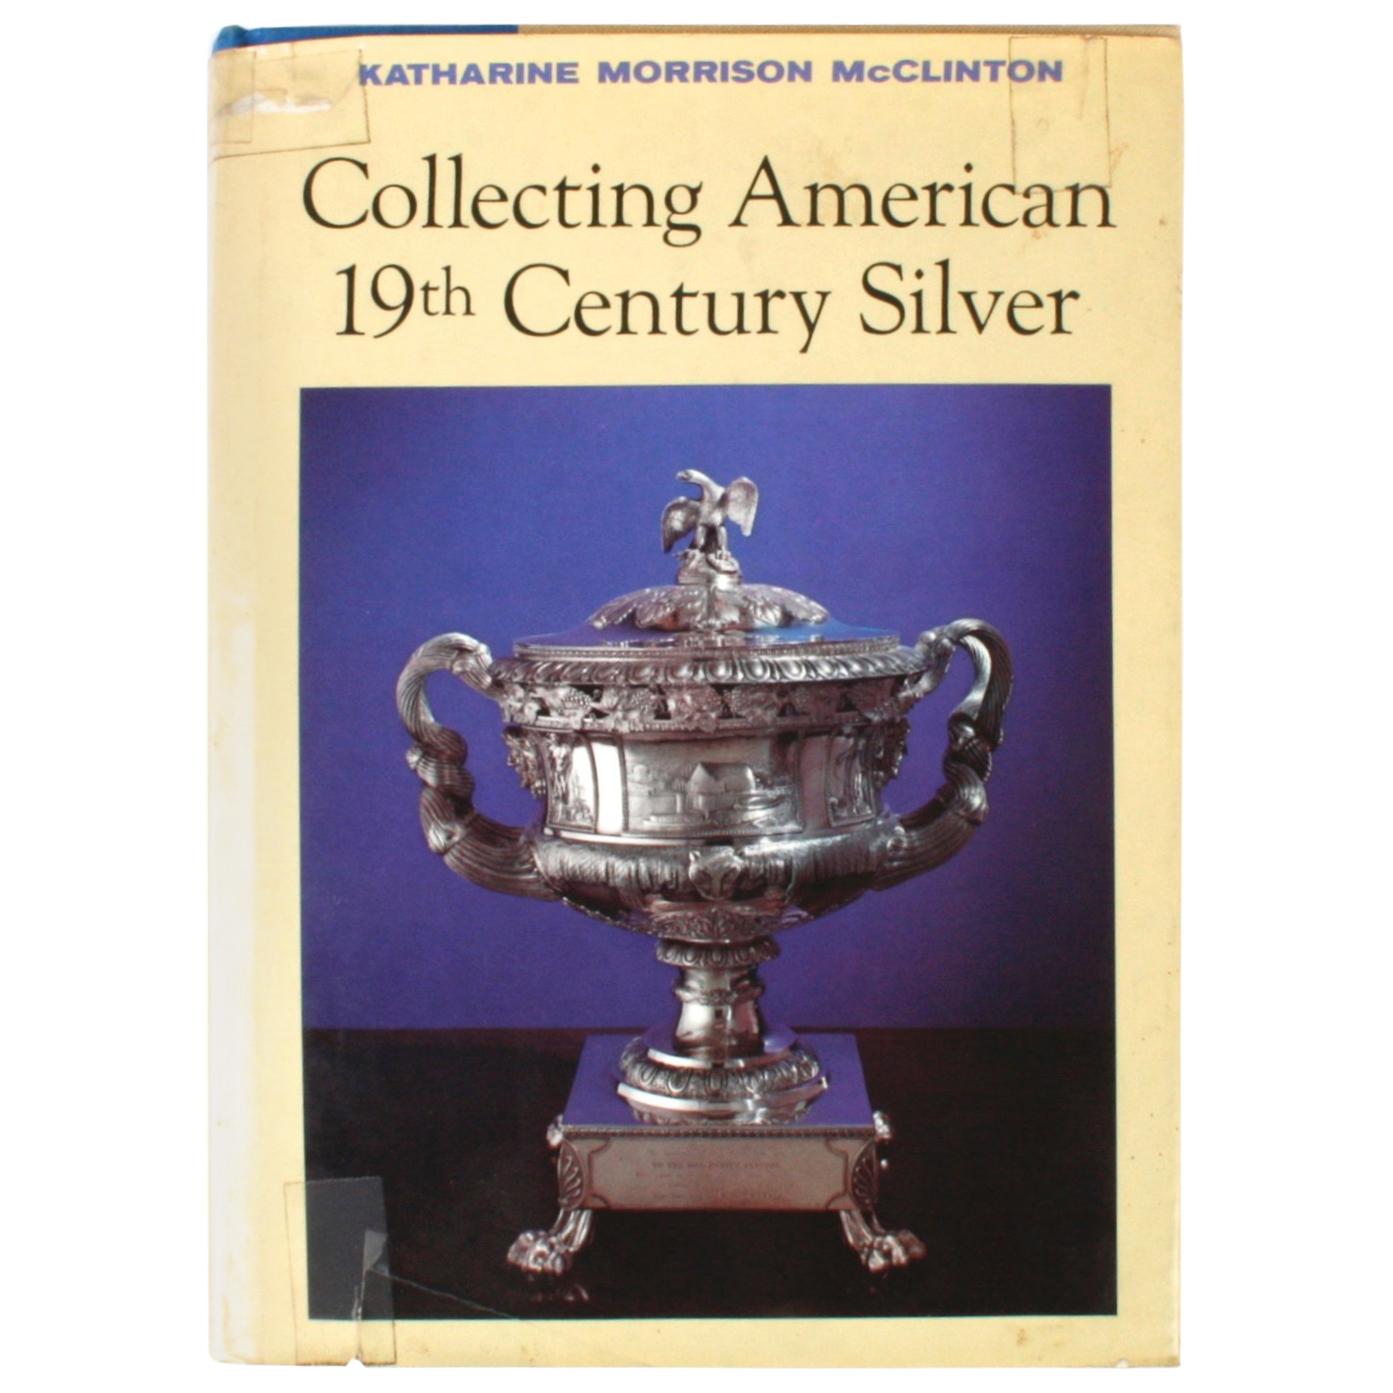 Collecting American 19th Century Silver by Katherine Morrison McClinton